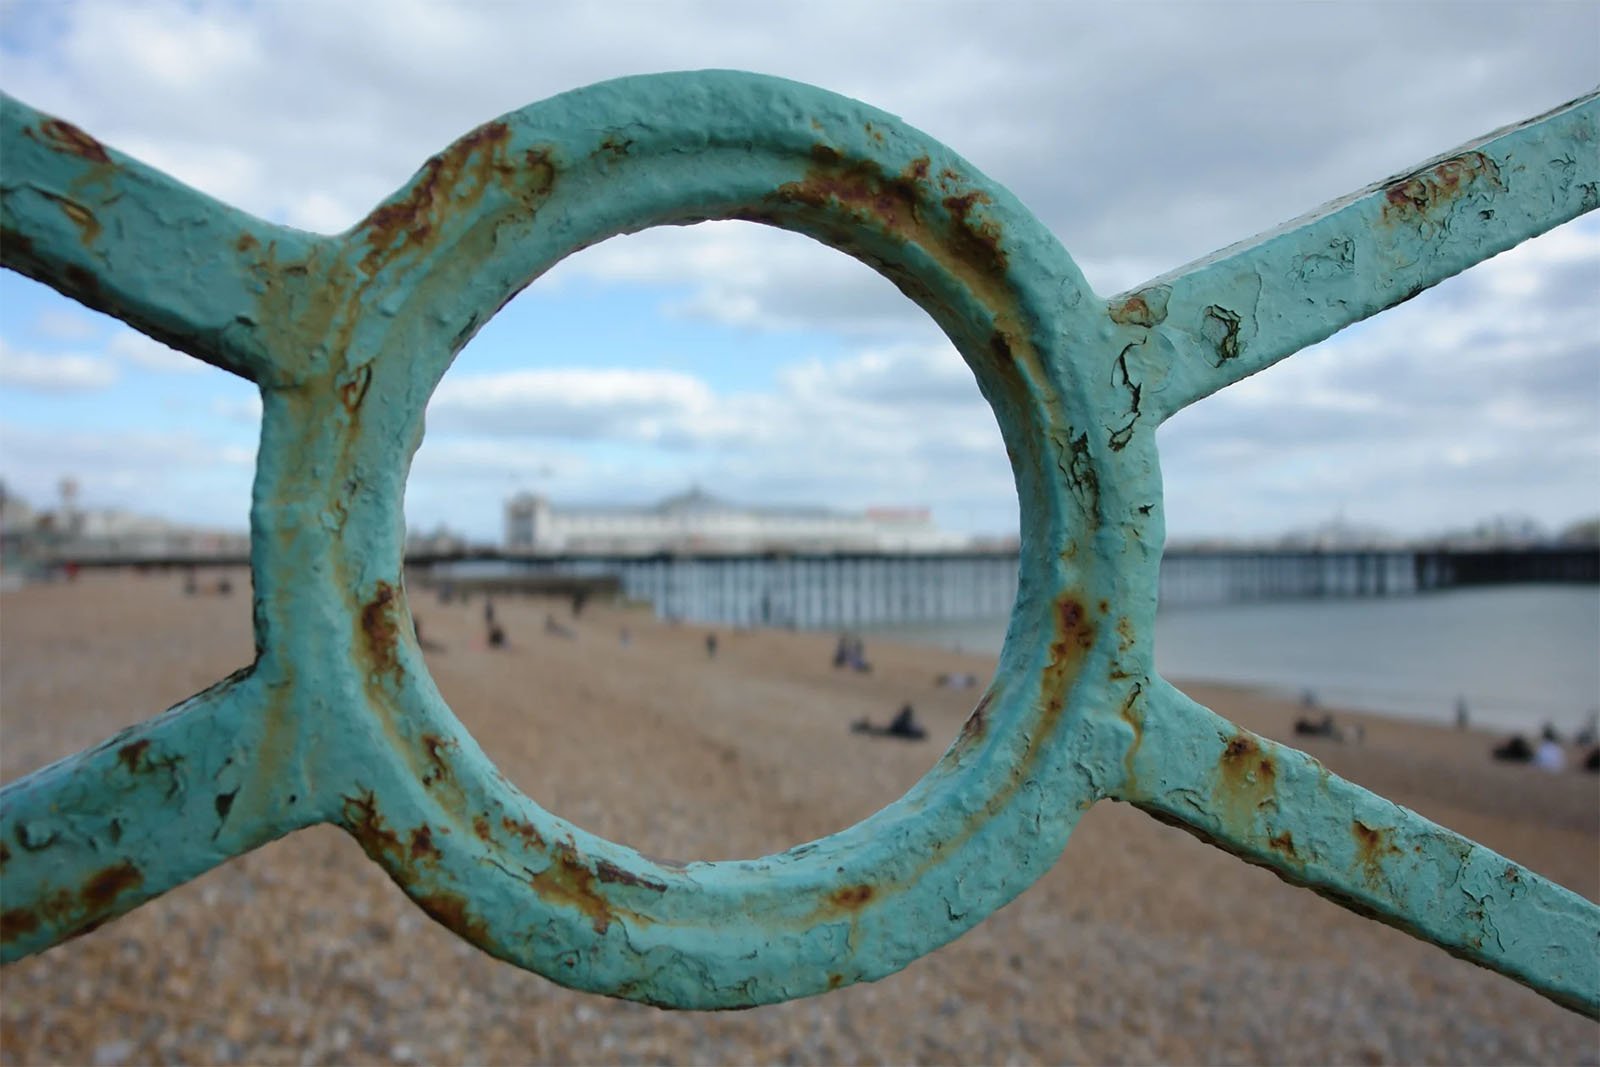 Close-up view of a weathered turquoise railing with a circular pattern framing a distant pier, sandy beach, and scattered visitors under a cloudy sky.